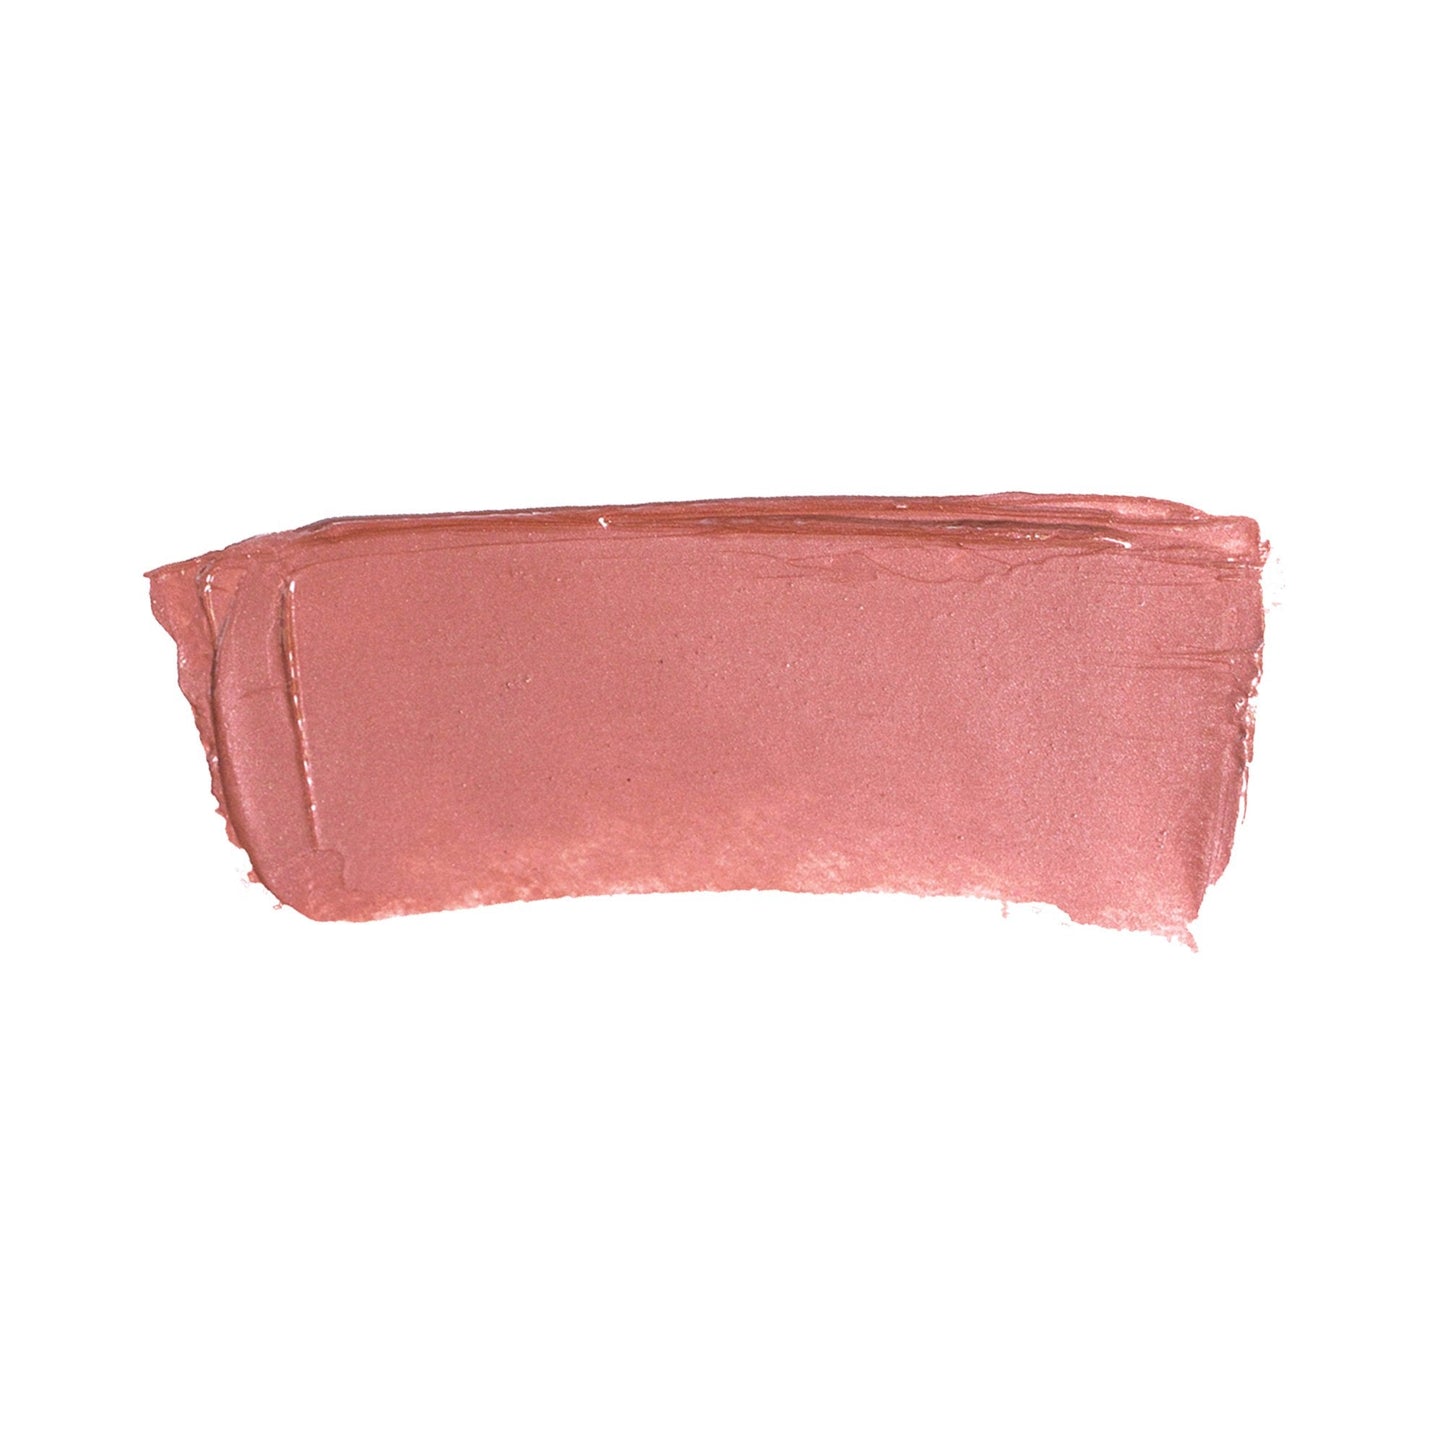 Gel Color Lip and Cheek Balm in shade posh texture swatch